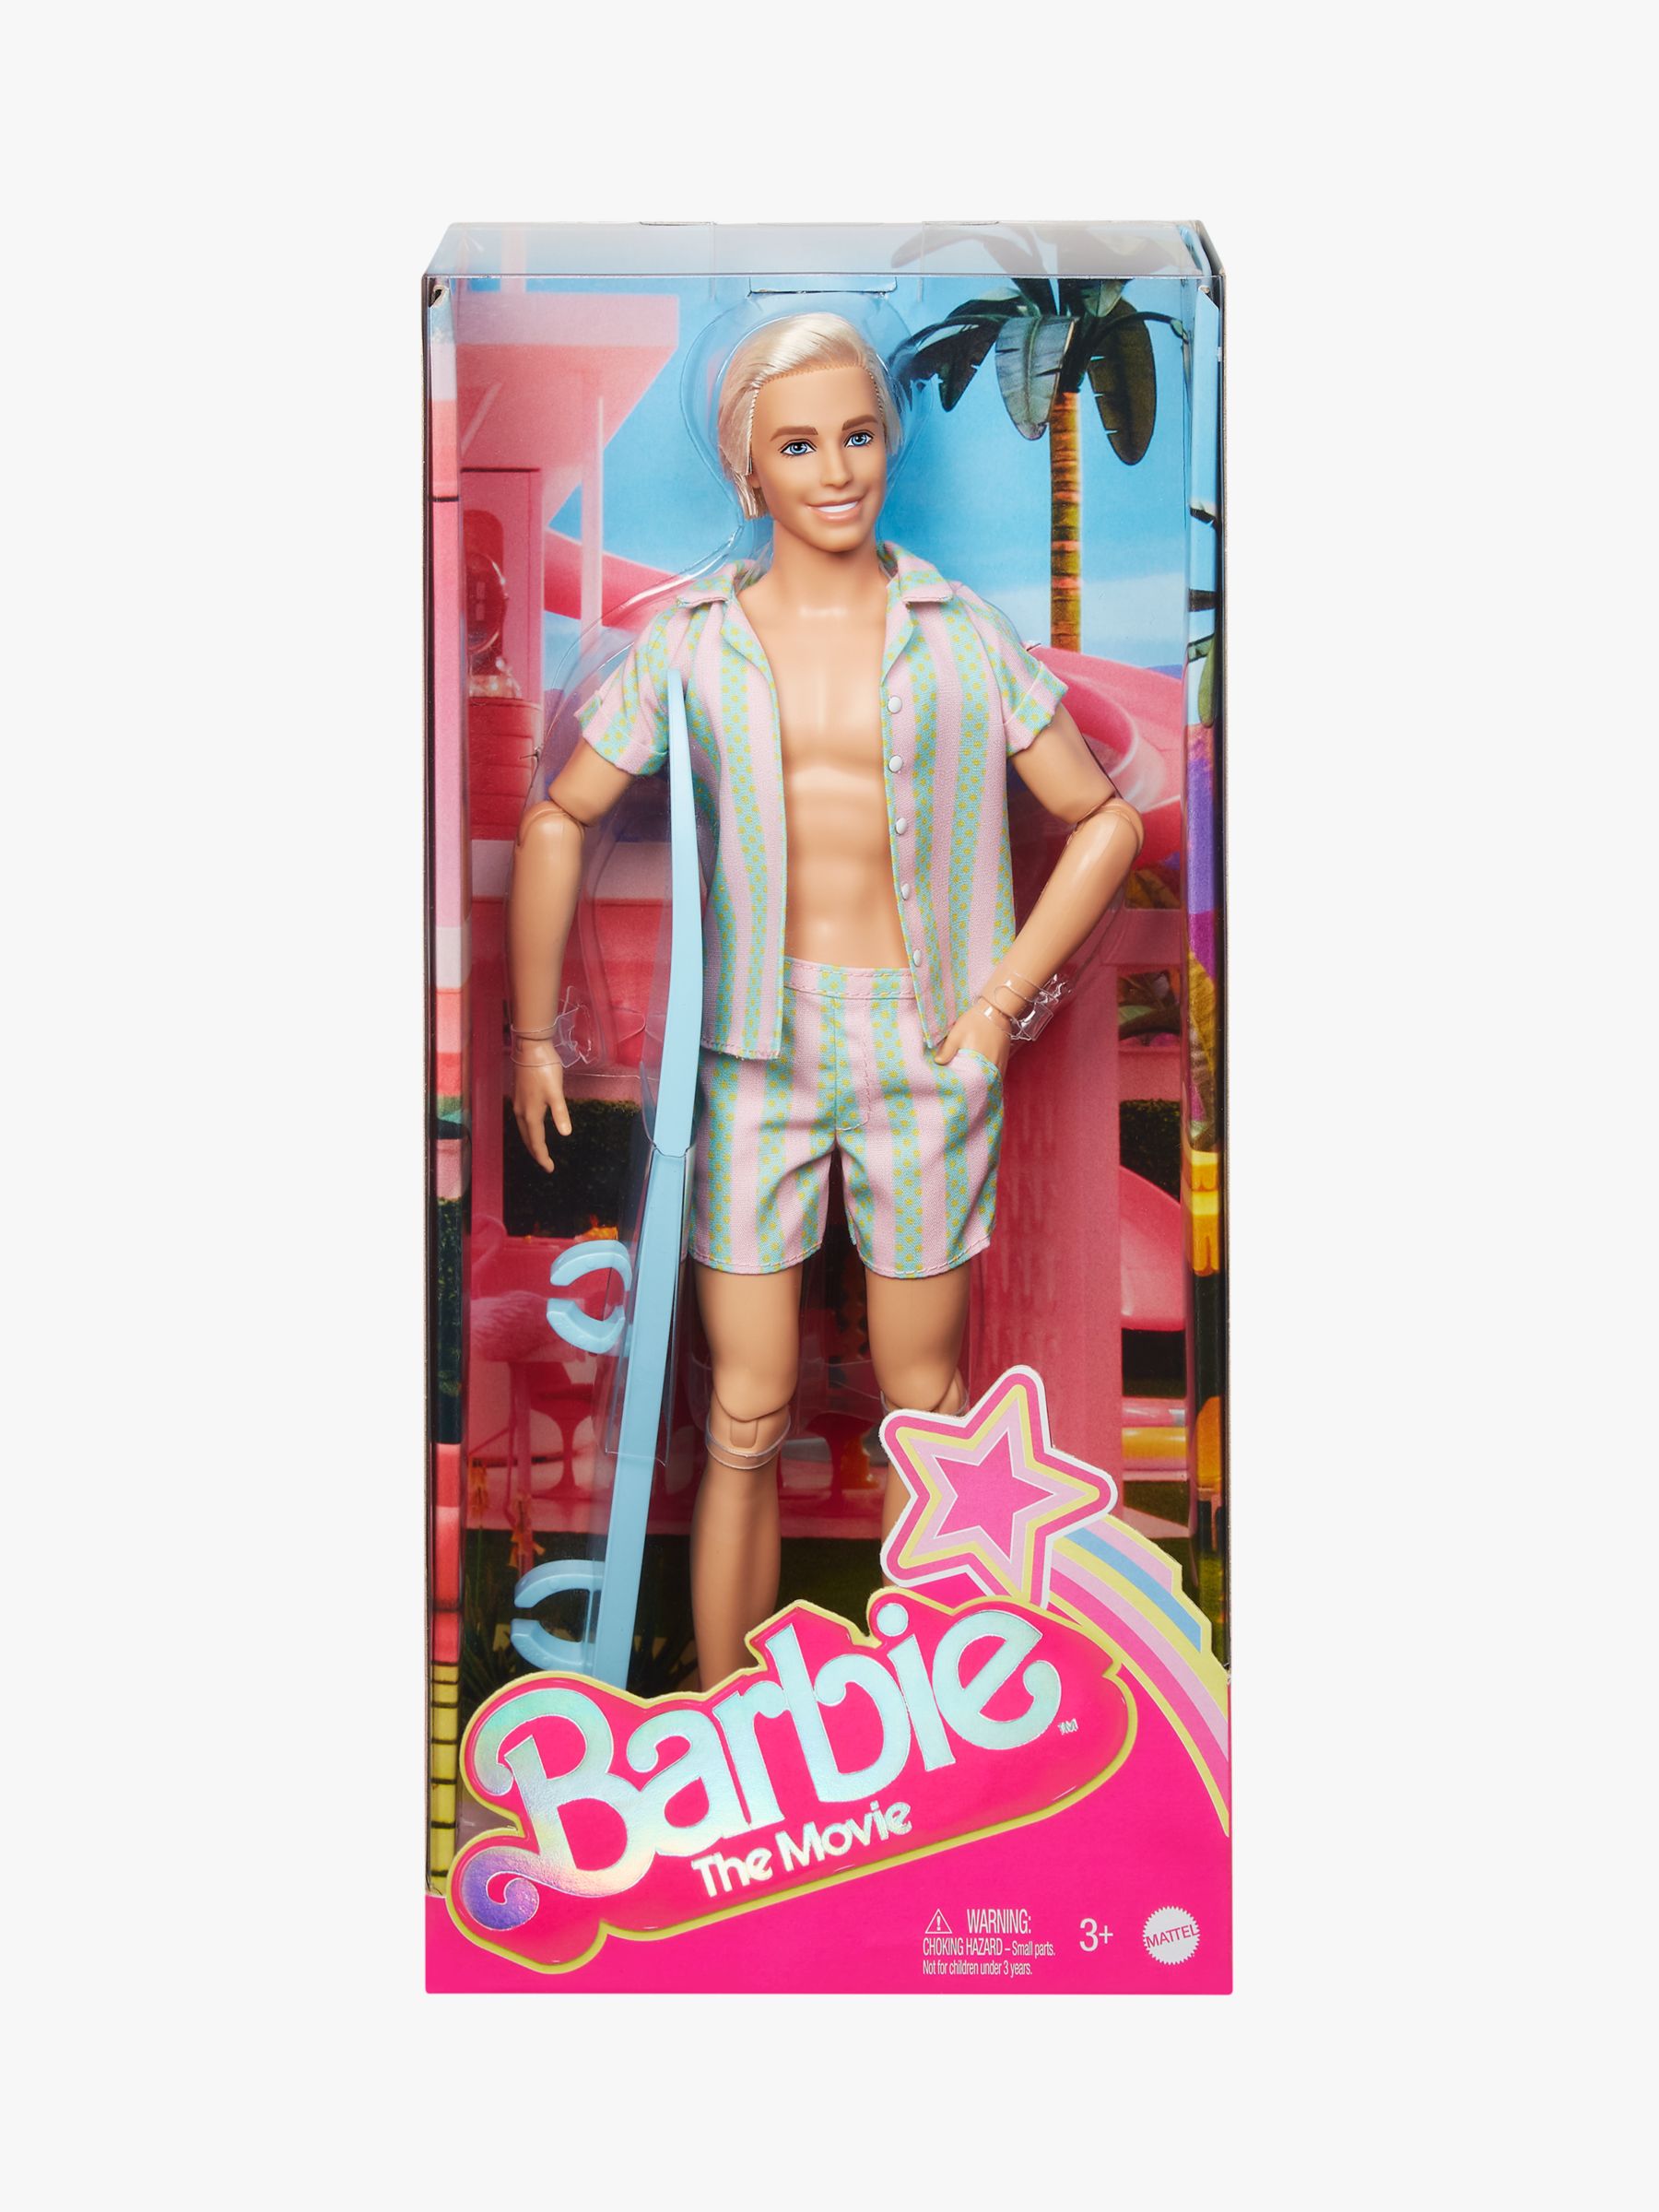 Barbie Ken Fashionista Doll CHOICE OF CHARACTER, ONE SUPPLIED, NEW 